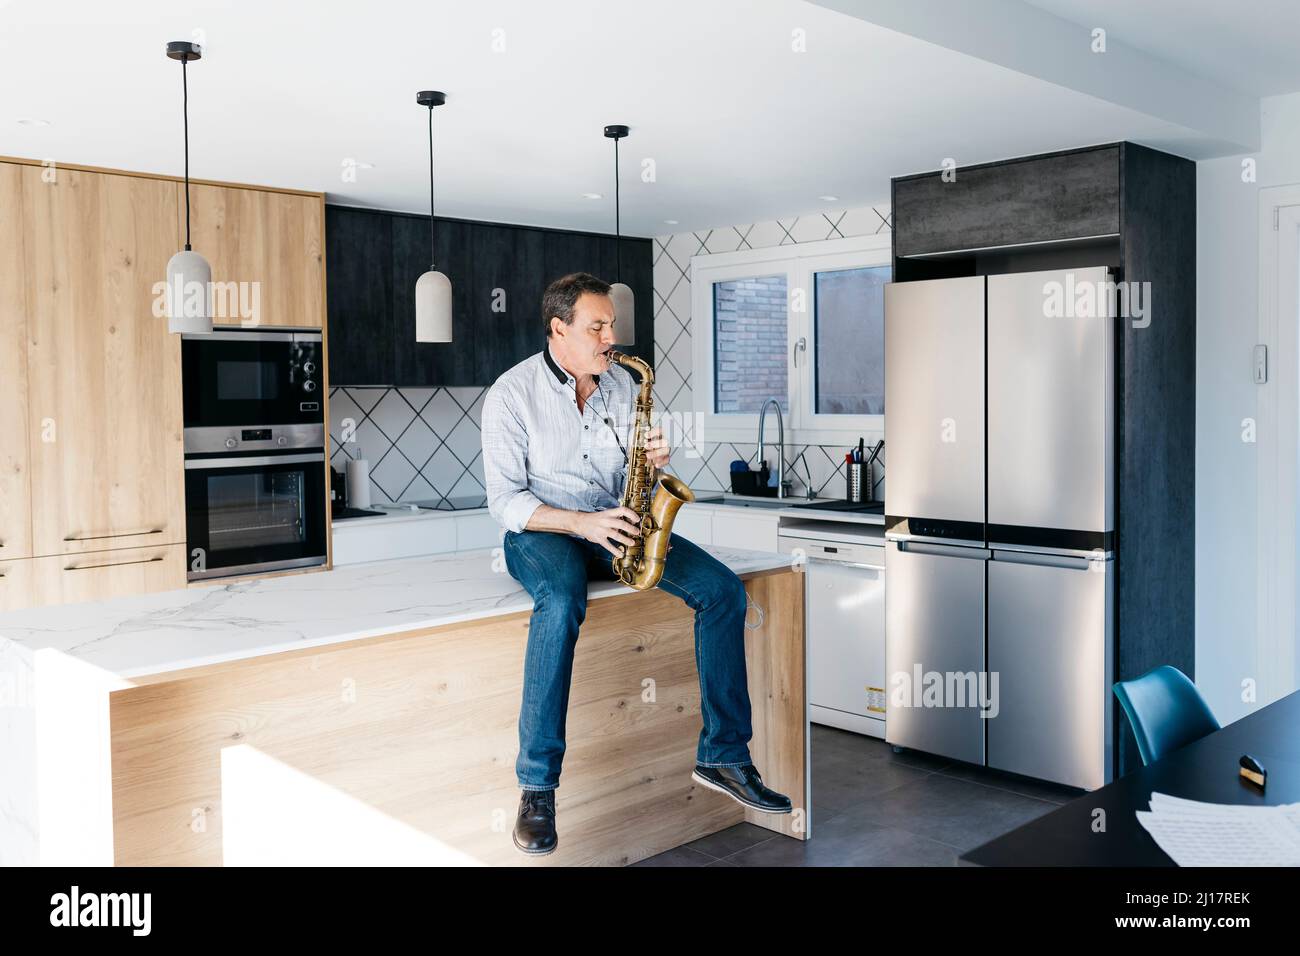 Musician playing saxophone sitting on kitchen island at home Stock Photo